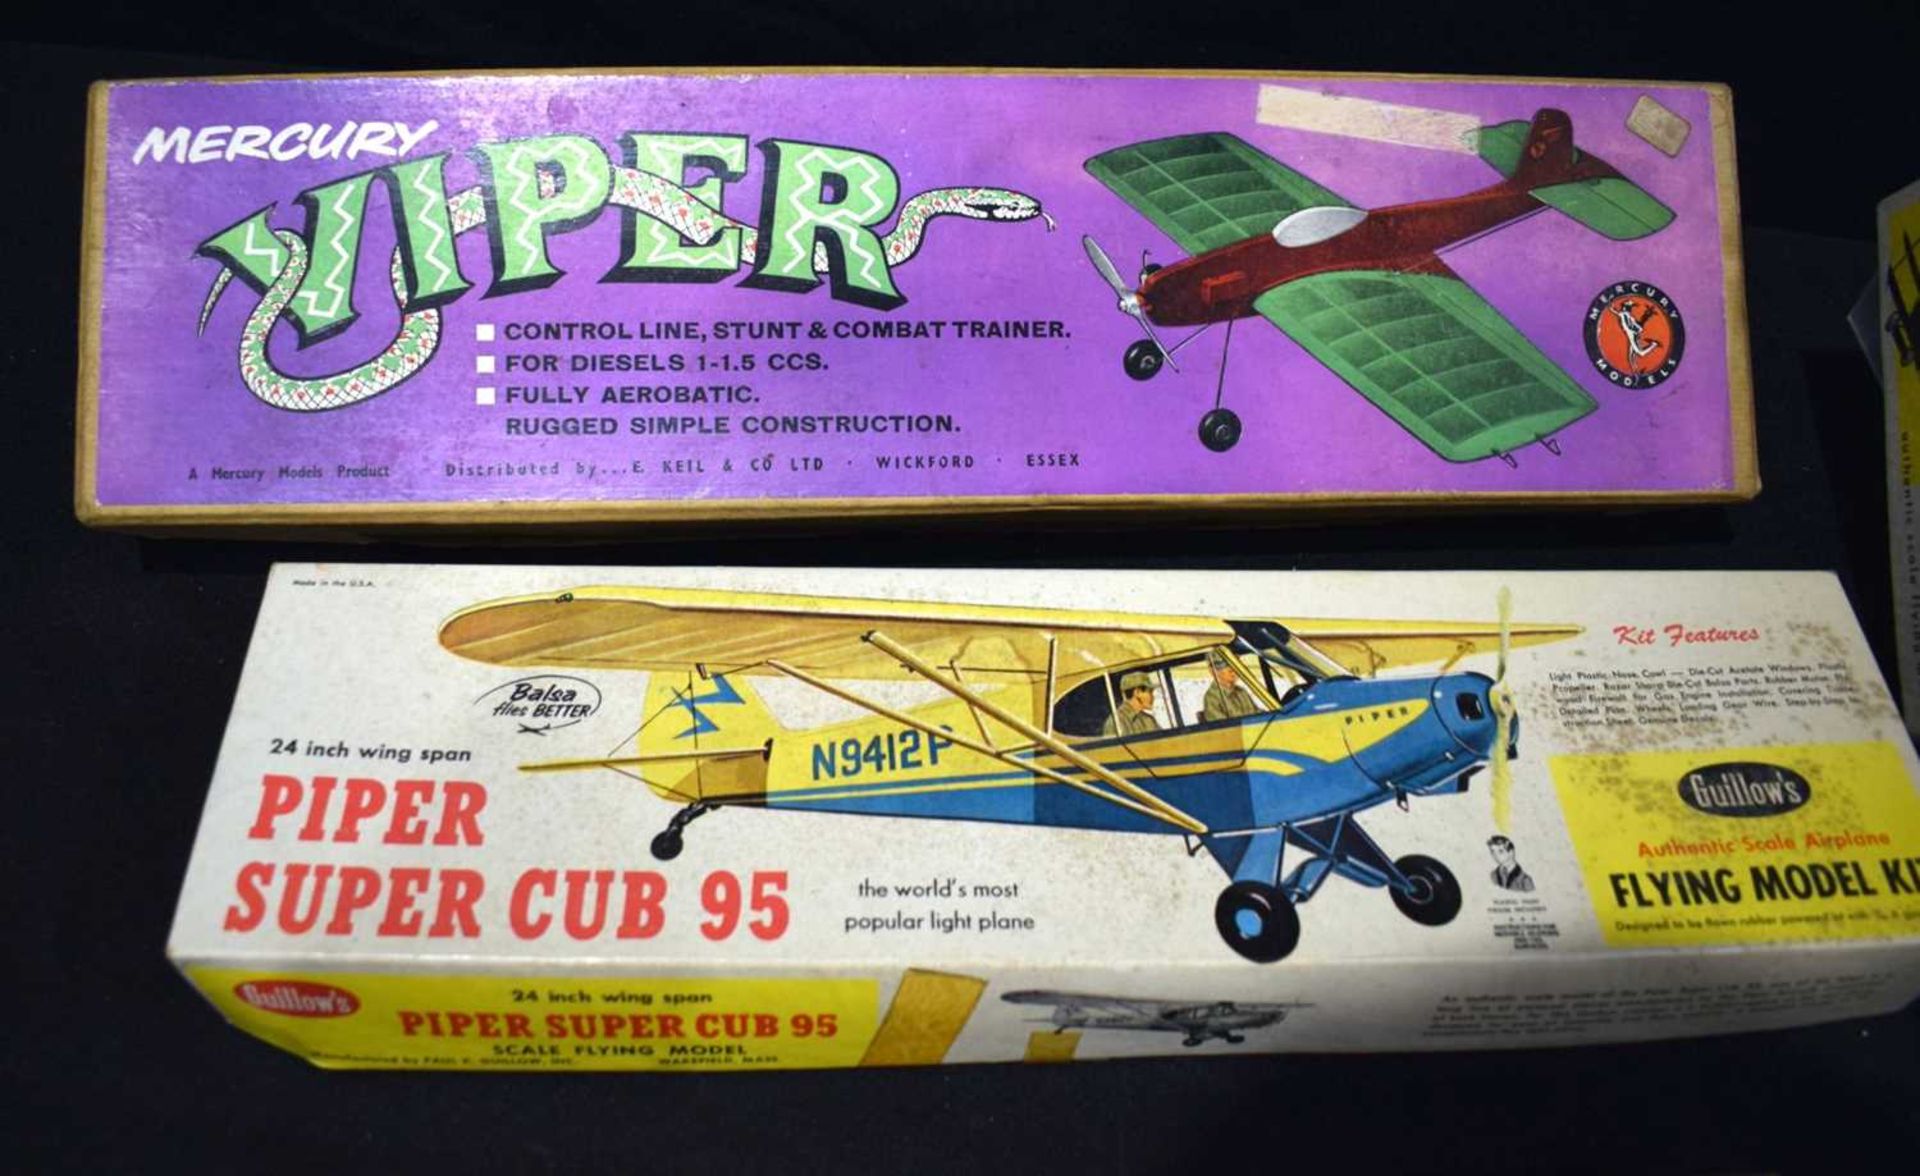 A Collection of boxed model aircraft Kits Keil Crafts, Guillow's etc (6) - Image 2 of 5